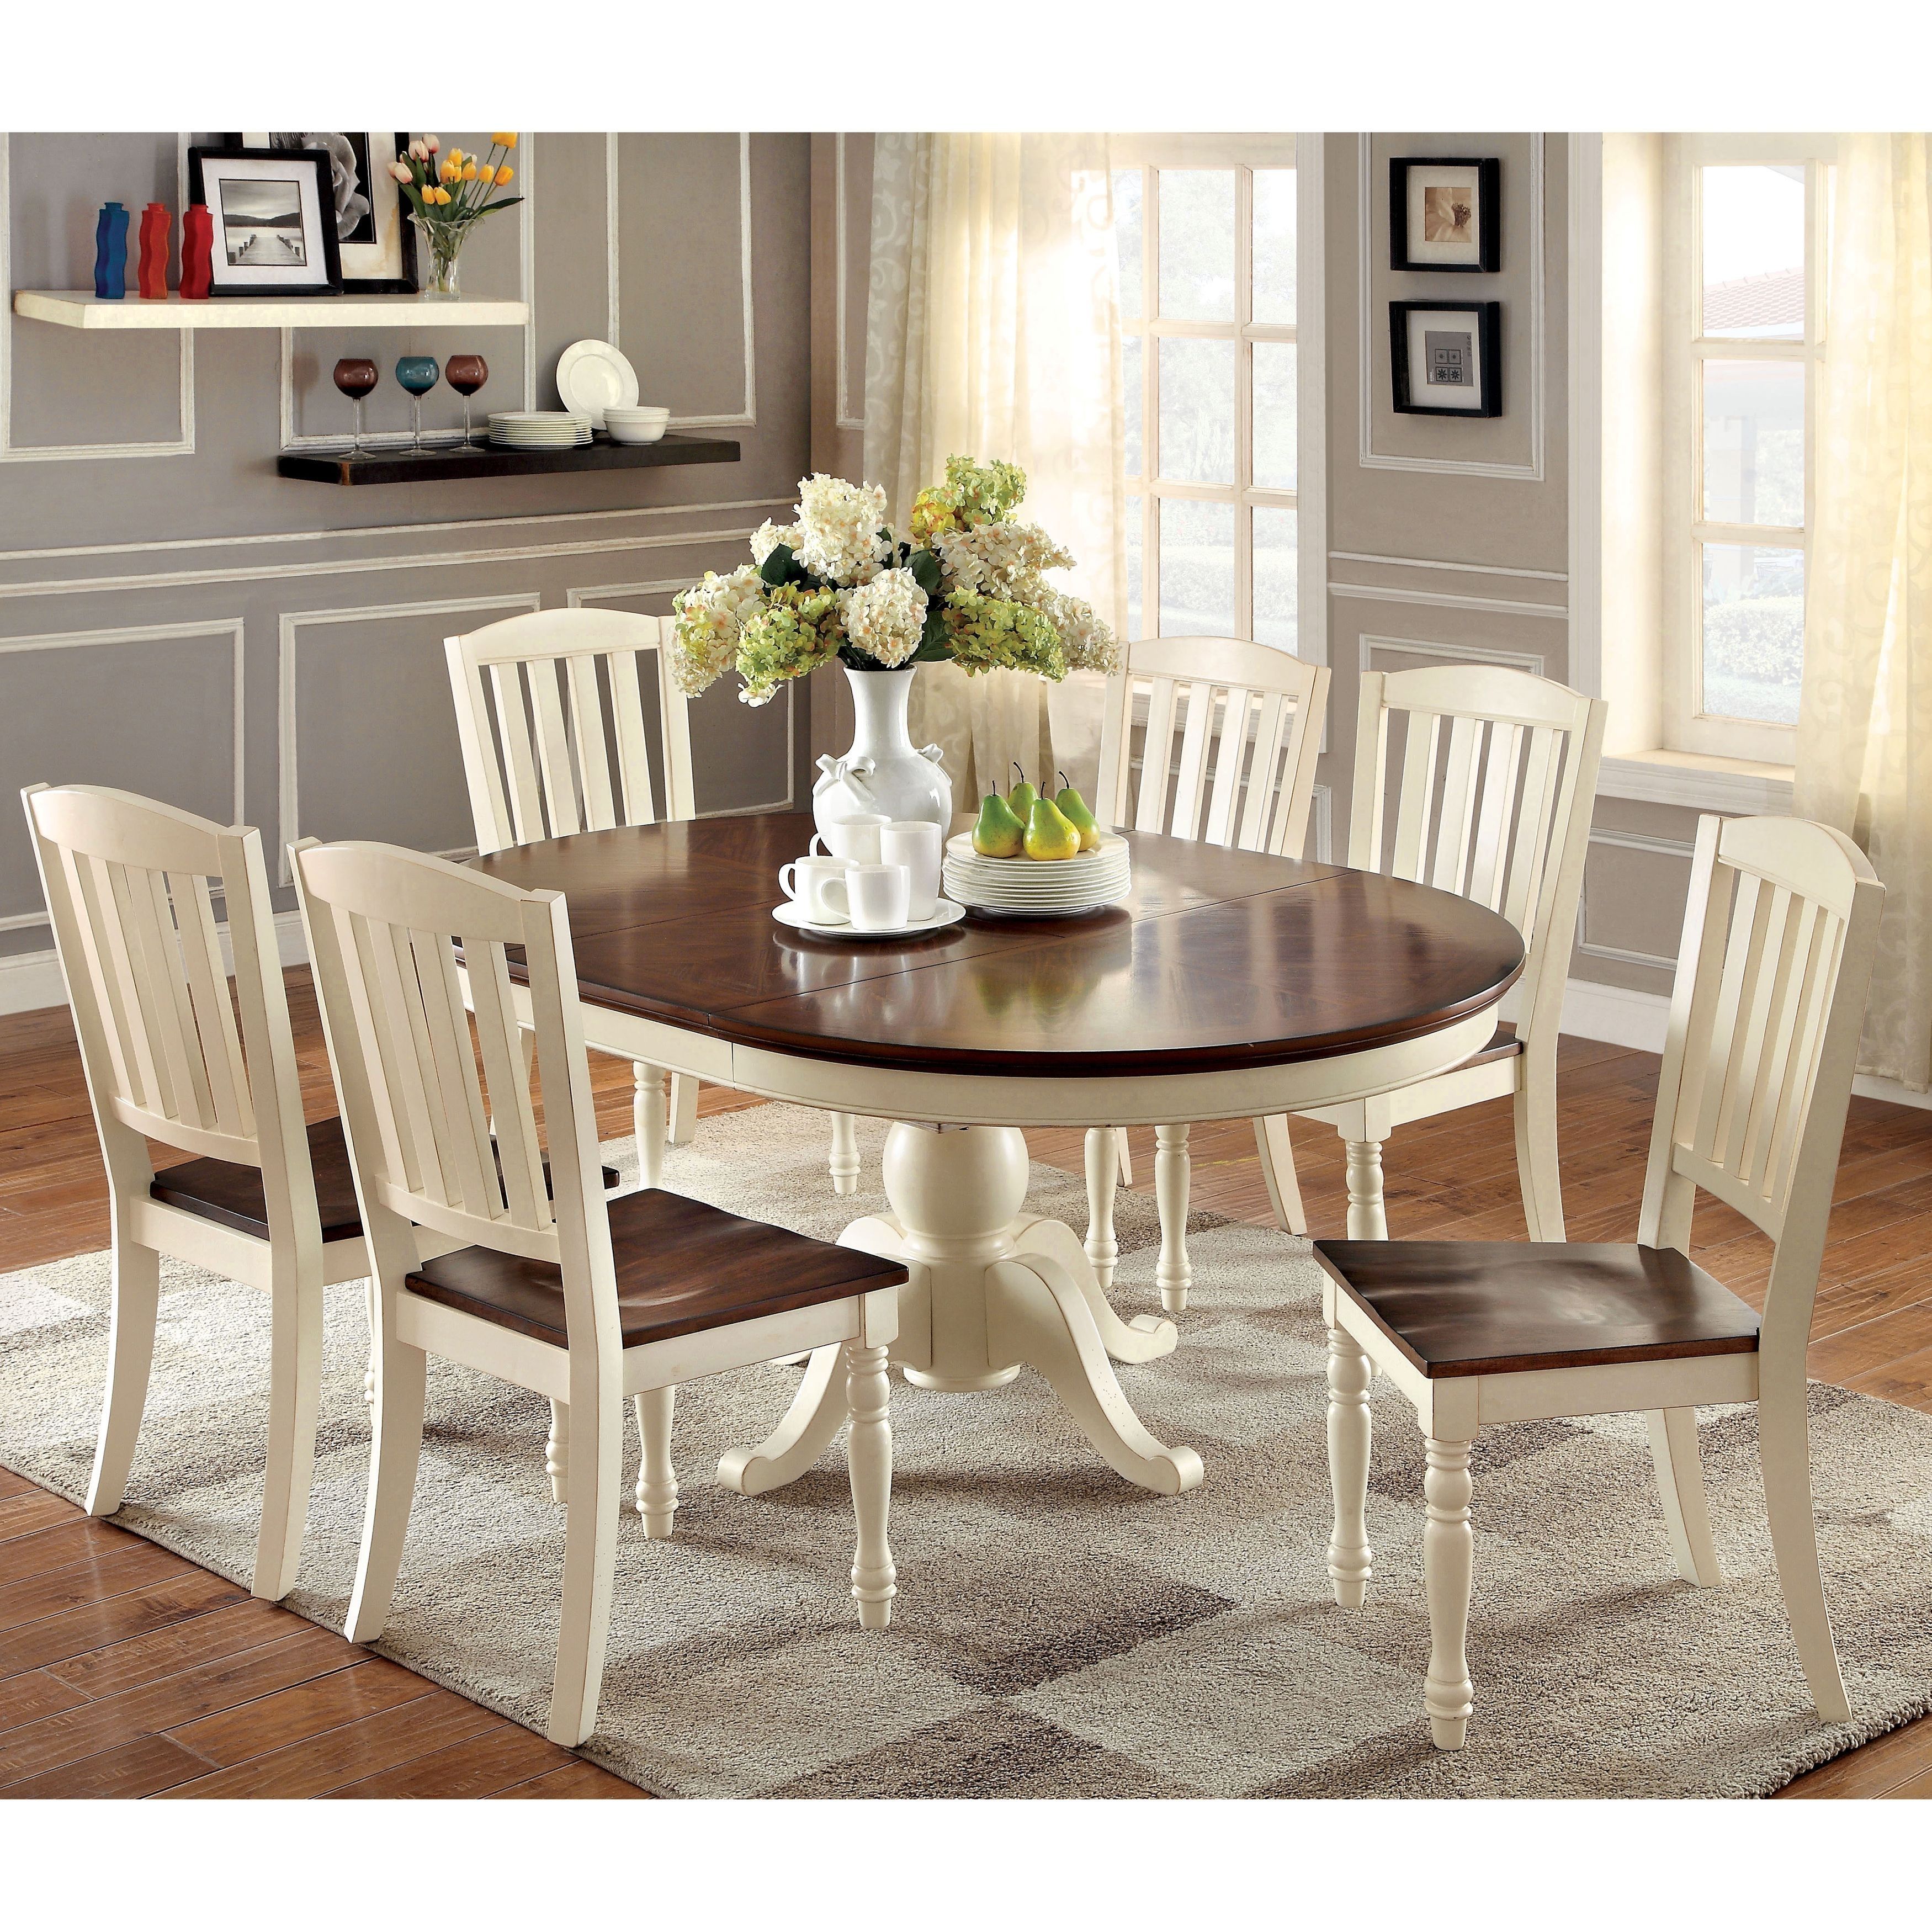 Furniture Of America Bethannie 7 Piece Cottage Style Oval Dining Set Regarding Most Popular Market 7 Piece Counter Sets (View 15 of 20)